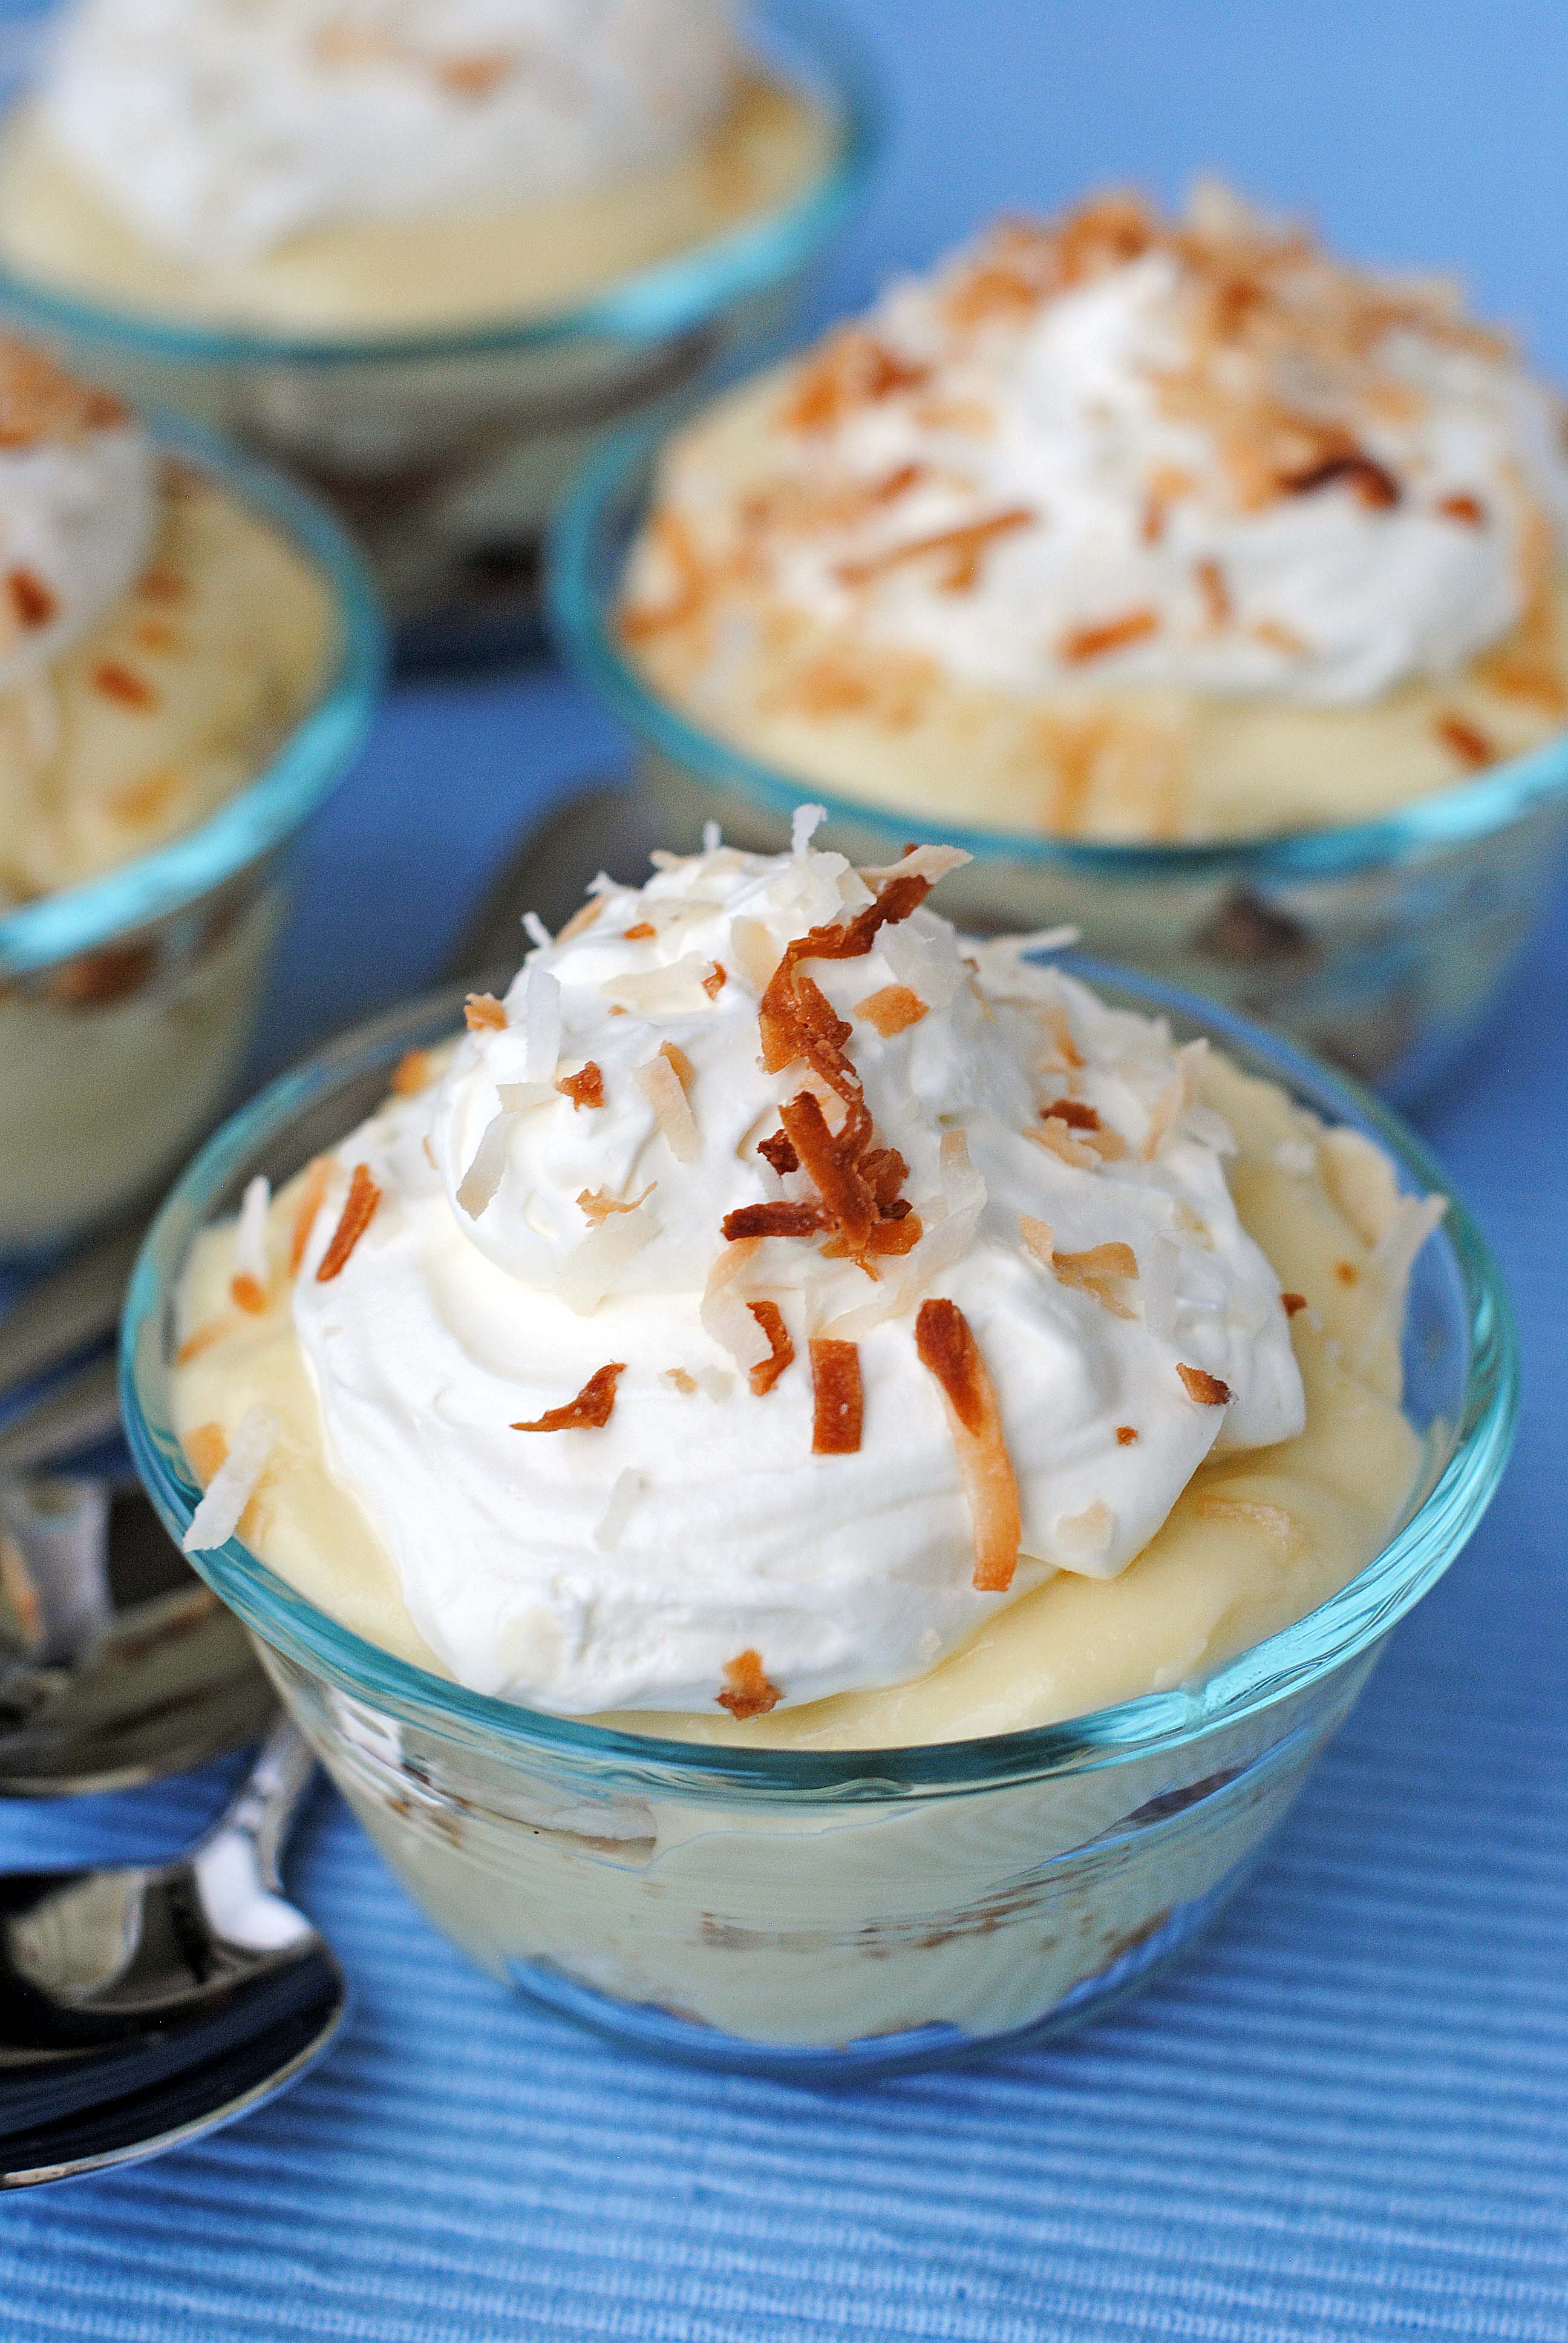 Banana Pudding - Delicious, with homemade pudding. All of the traditional flavors of banana pudding in individual serving dishes.